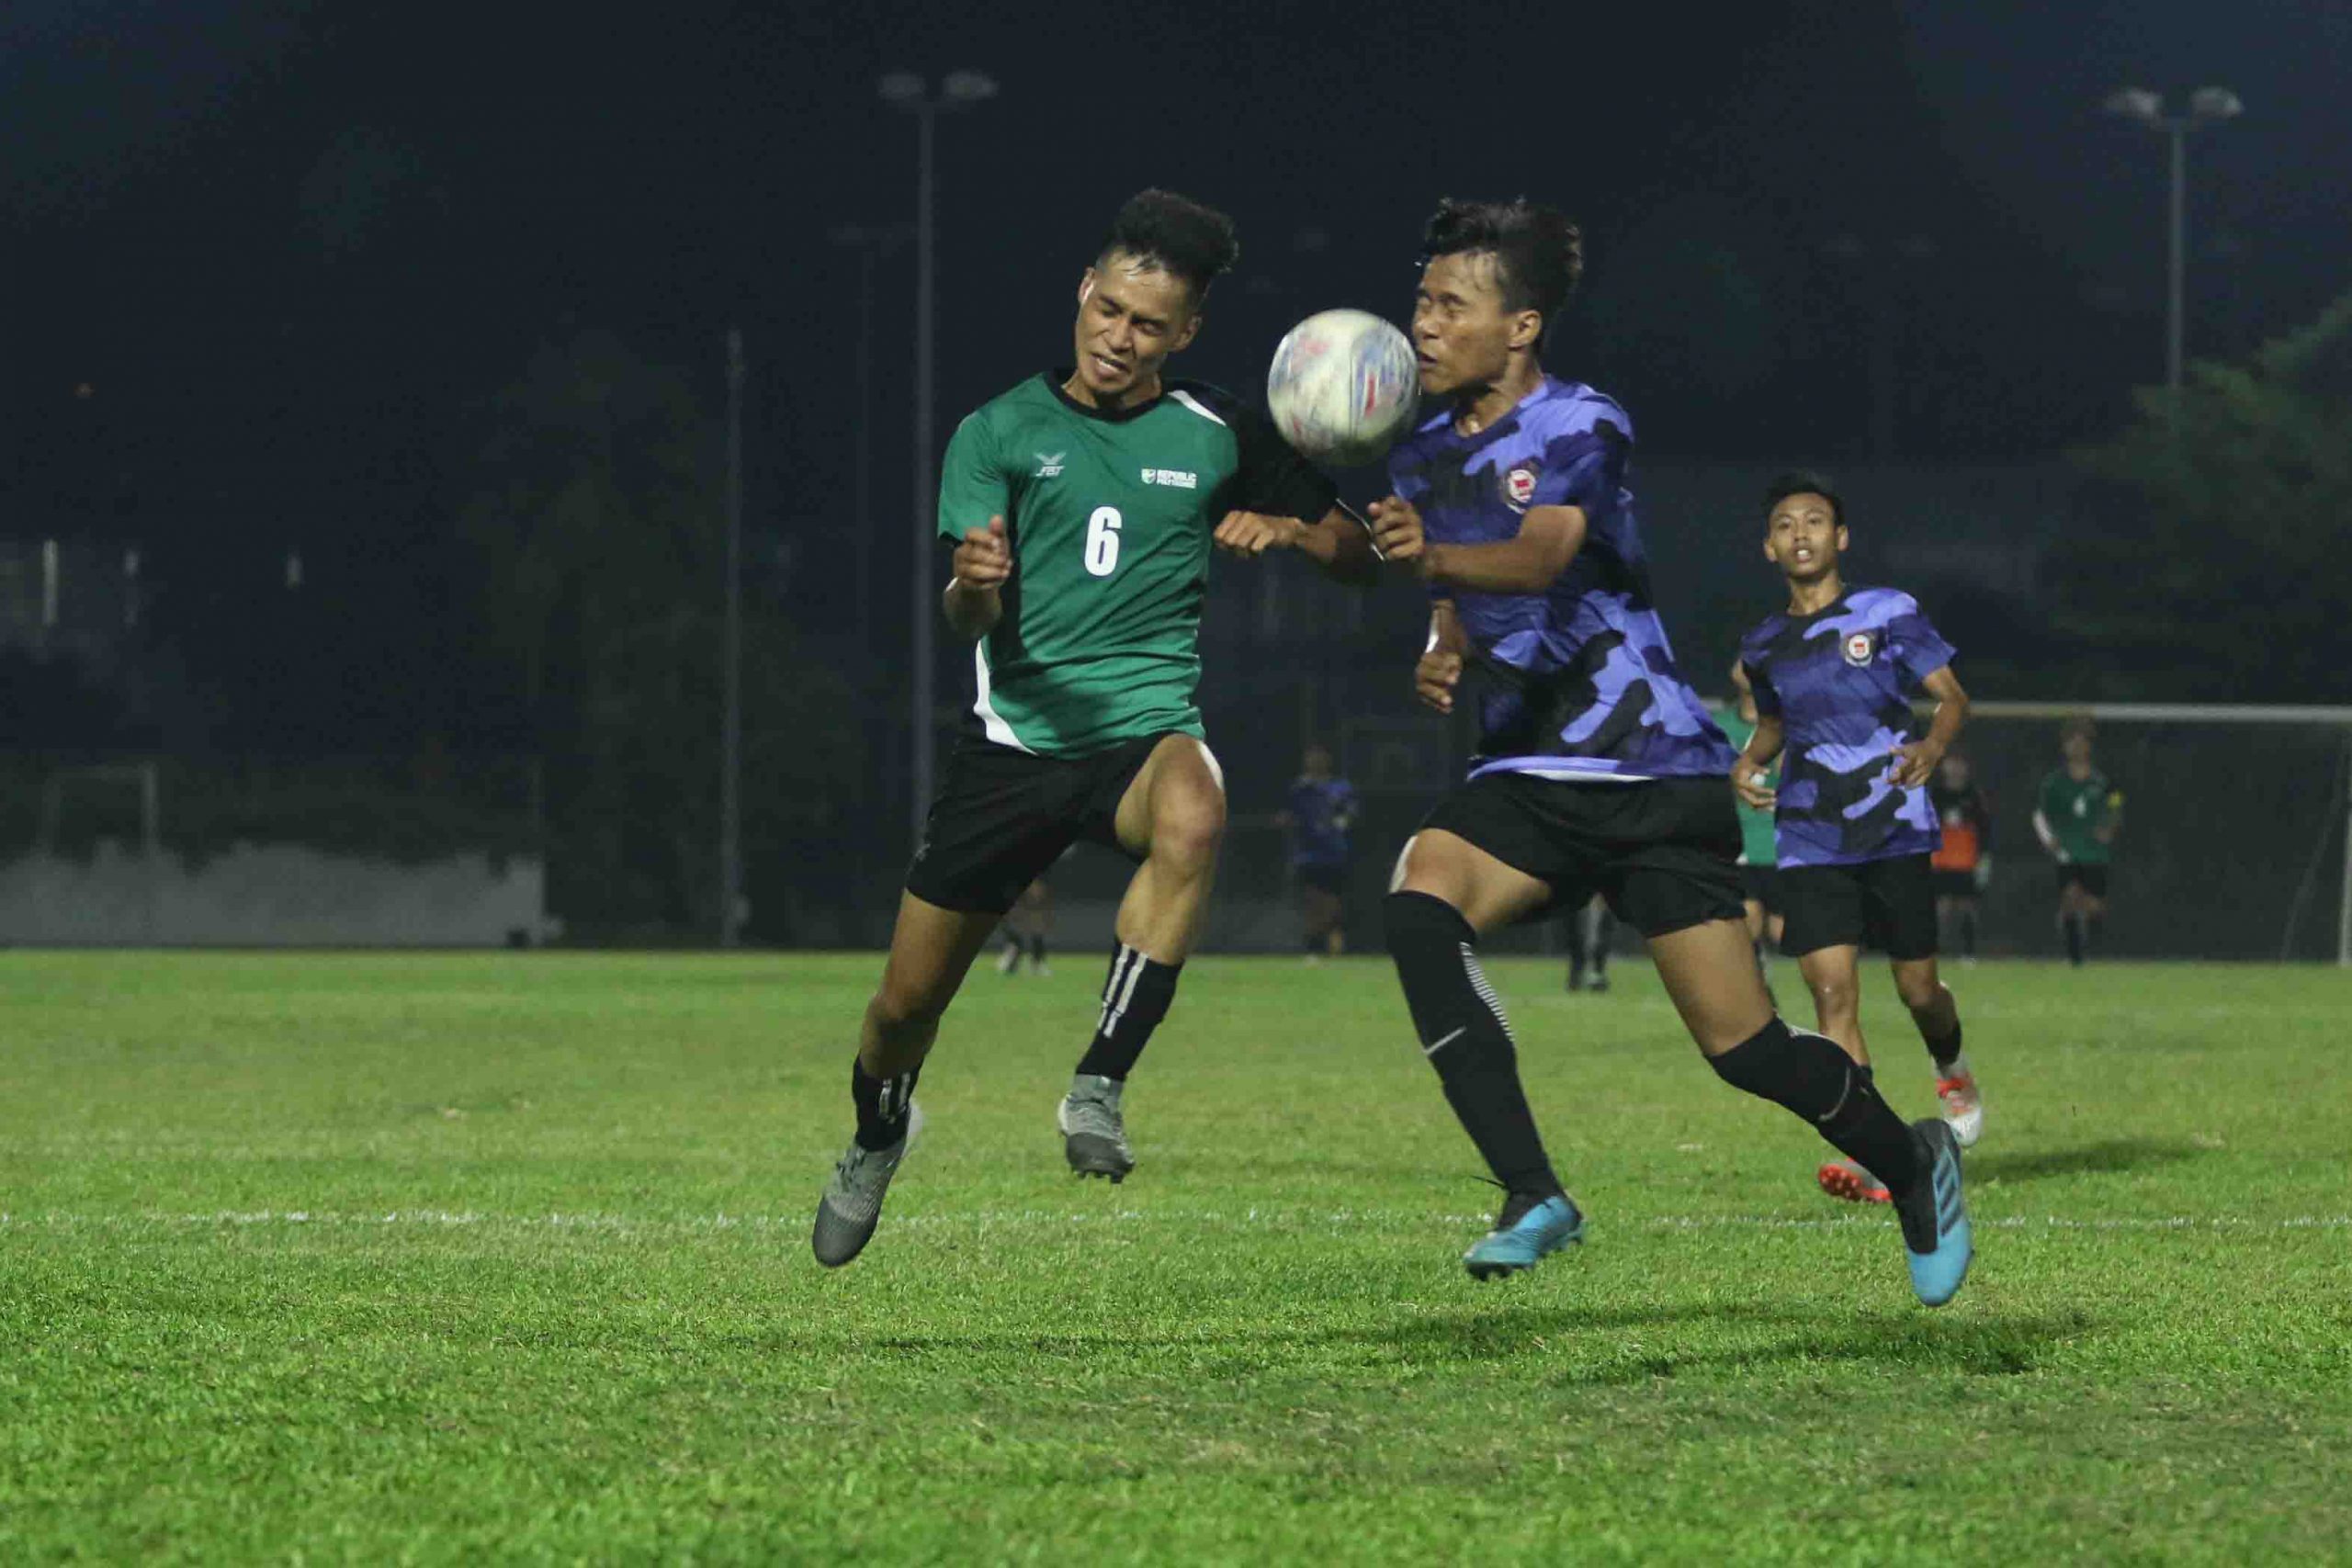 Muhammad Hairul (RP #6) and Mohd Haikal B Rosli (ITE #14) challenges for possession of a loose ball. (Photo 6 © Clara Lau/Red Sports)